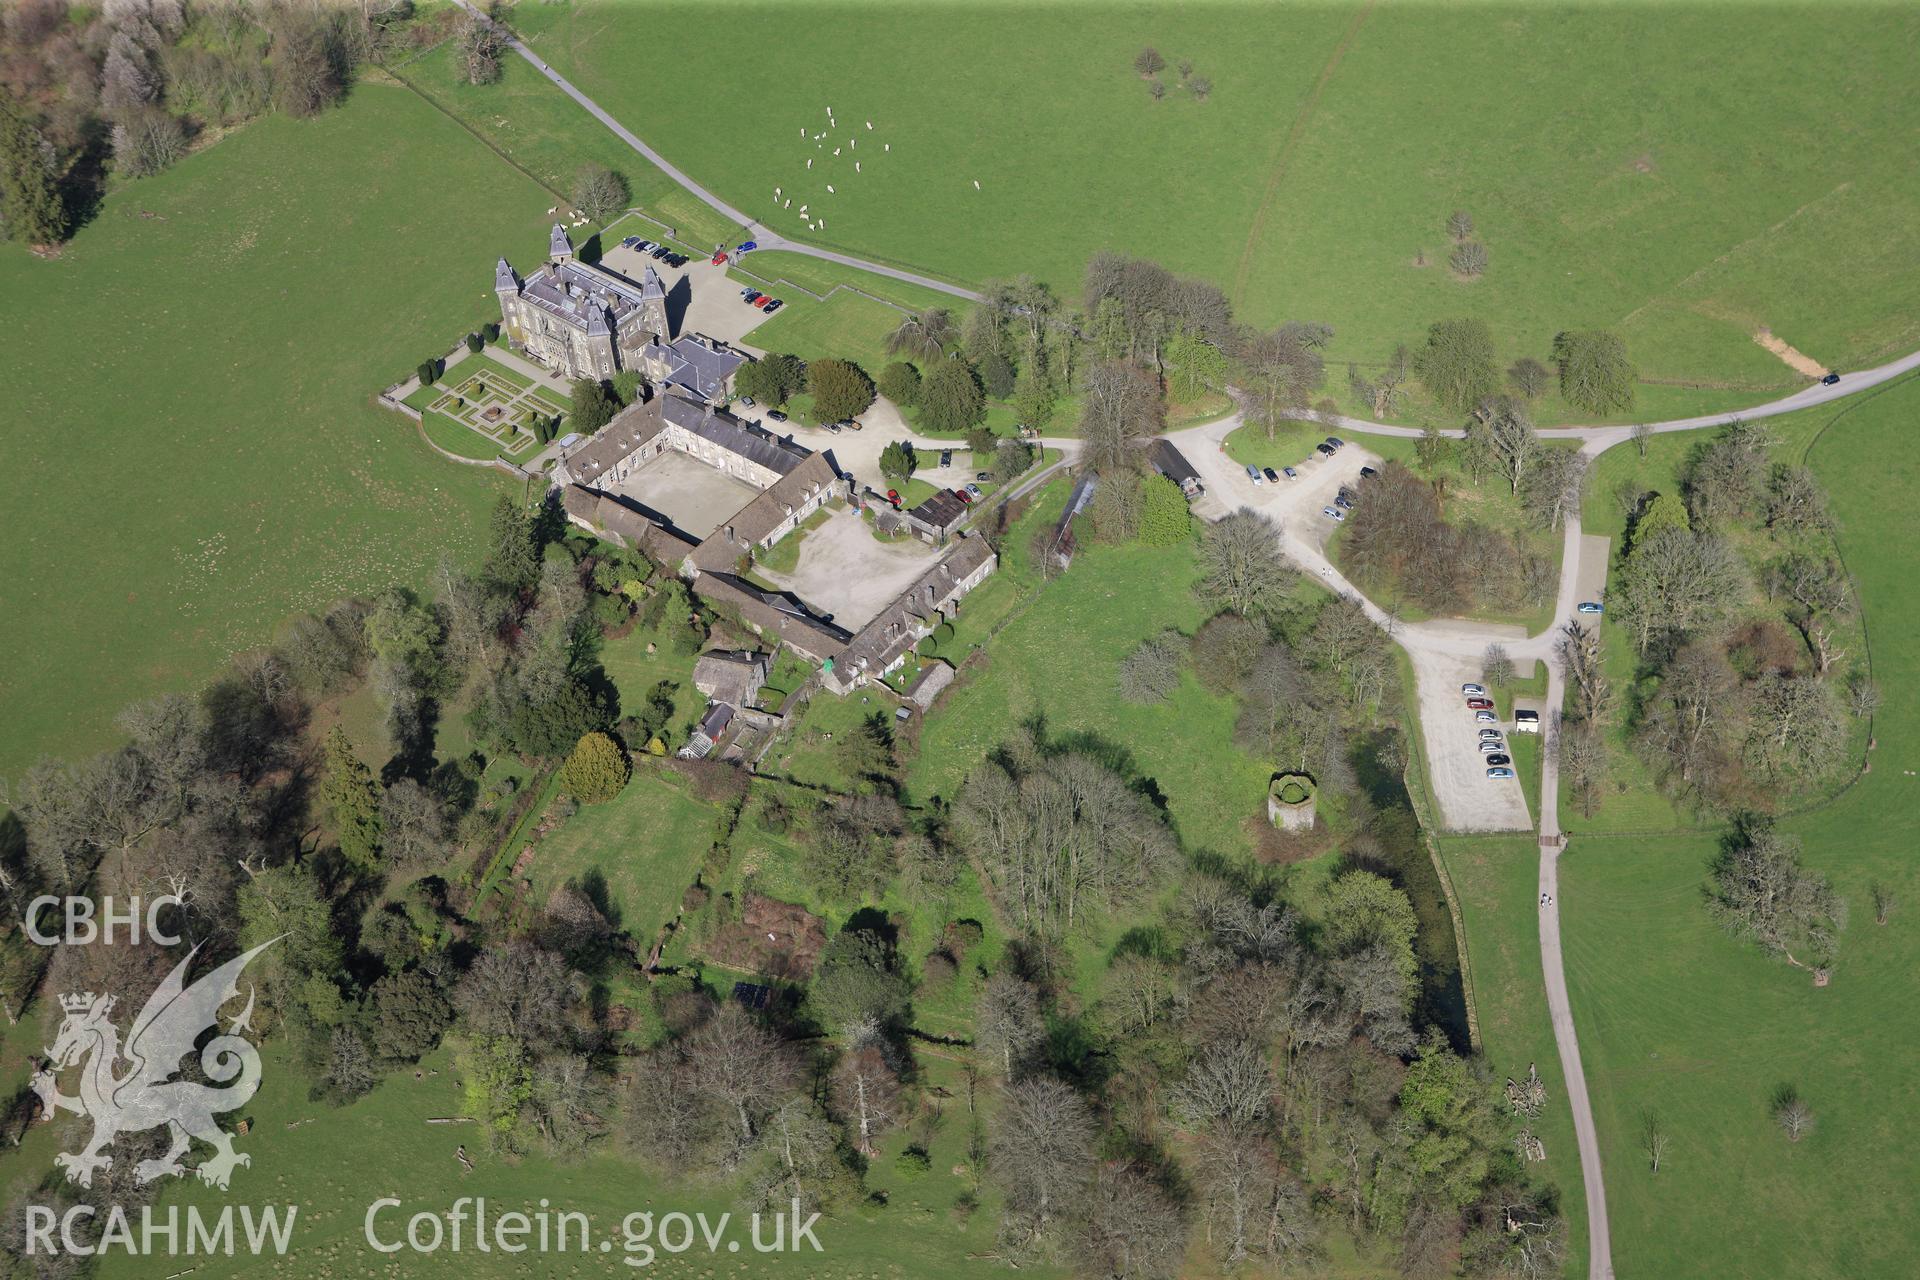 RCAHMW colour oblique photograph of Newton House, Dinefwr. Taken by Toby Driver on 08/04/2011.